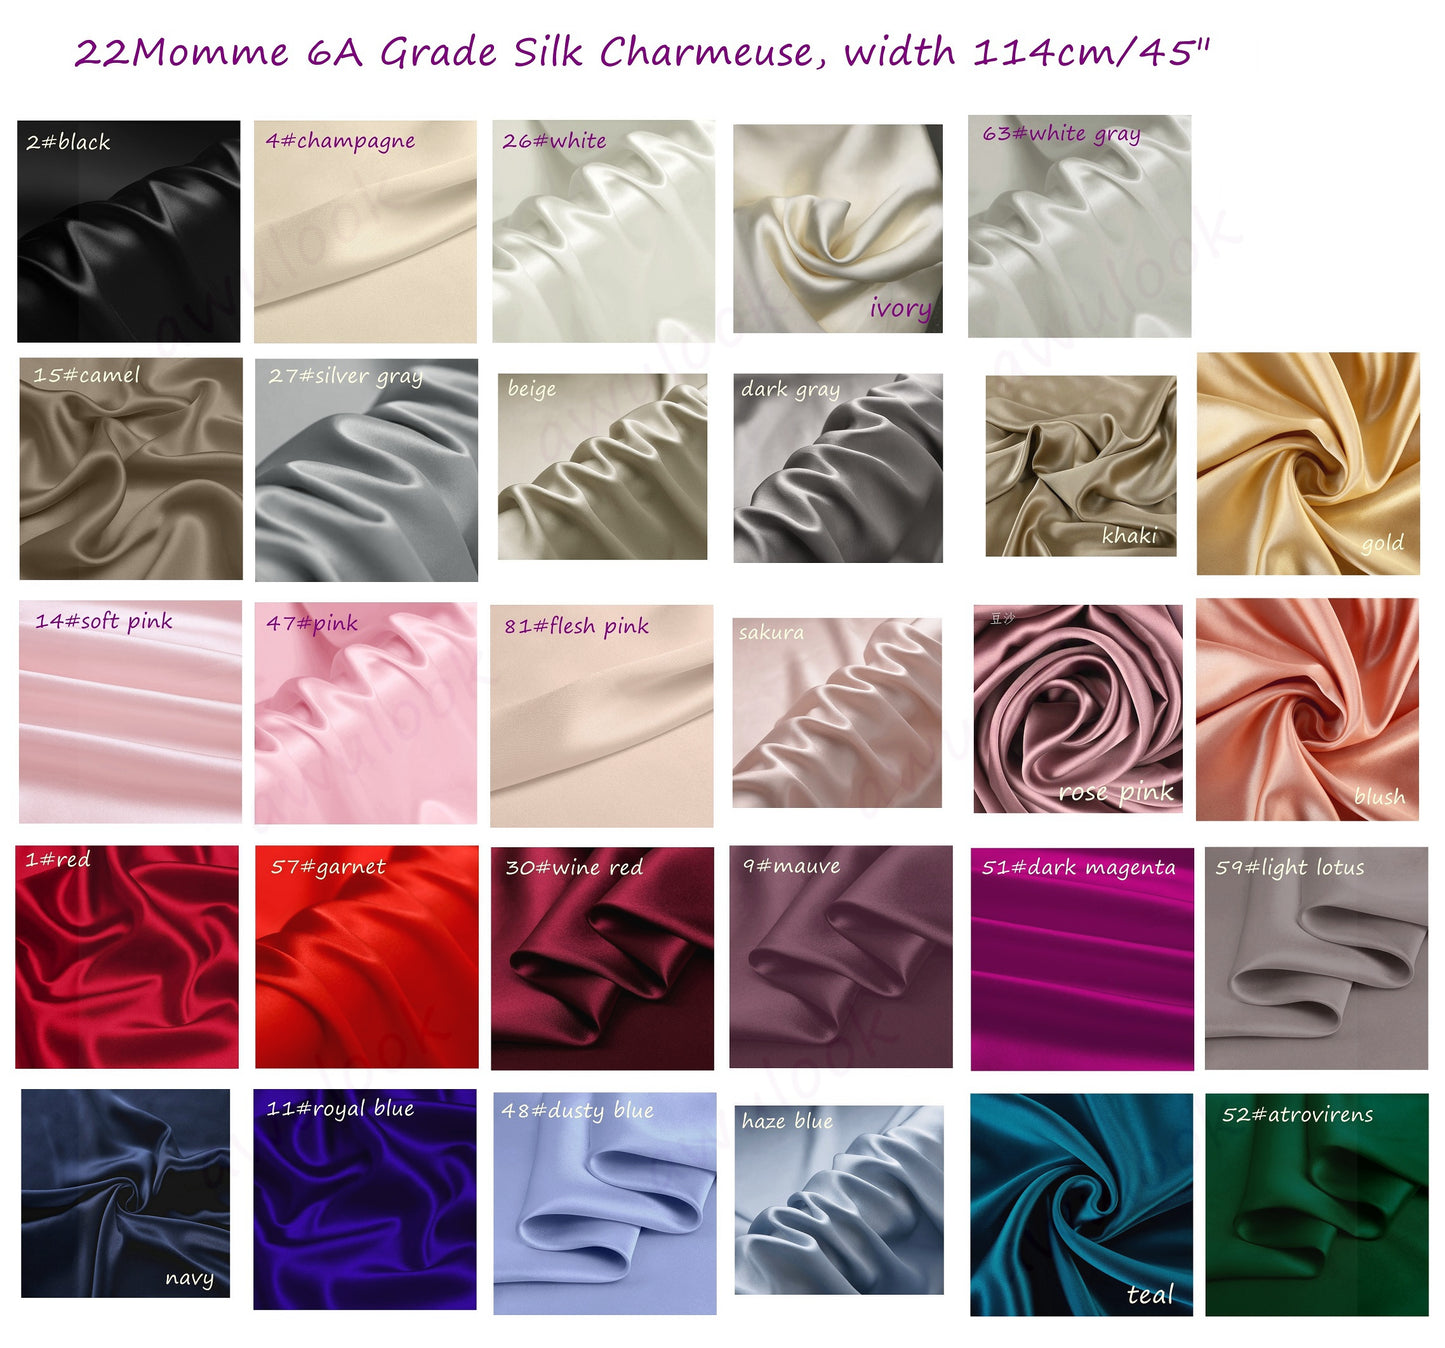 22Momme Mulberry Silk Charmeuse, Width 114cm/45" - Awulook